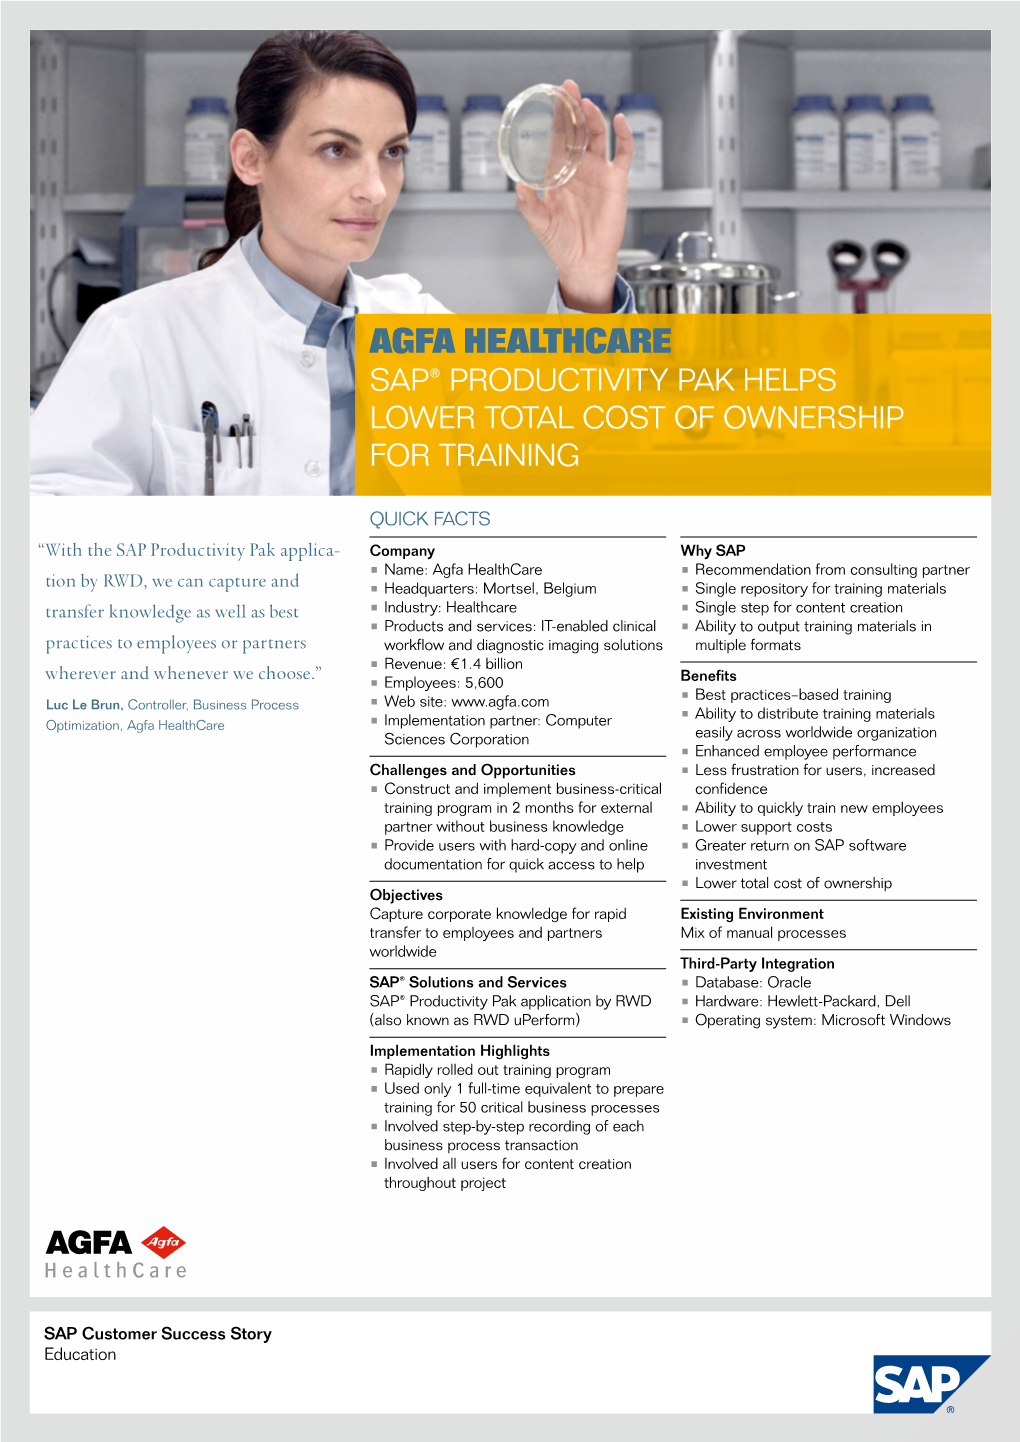 AGFA HEALTHCARE SAP® Productivity Pak Helps Lower Total Cost of Ownership for Training